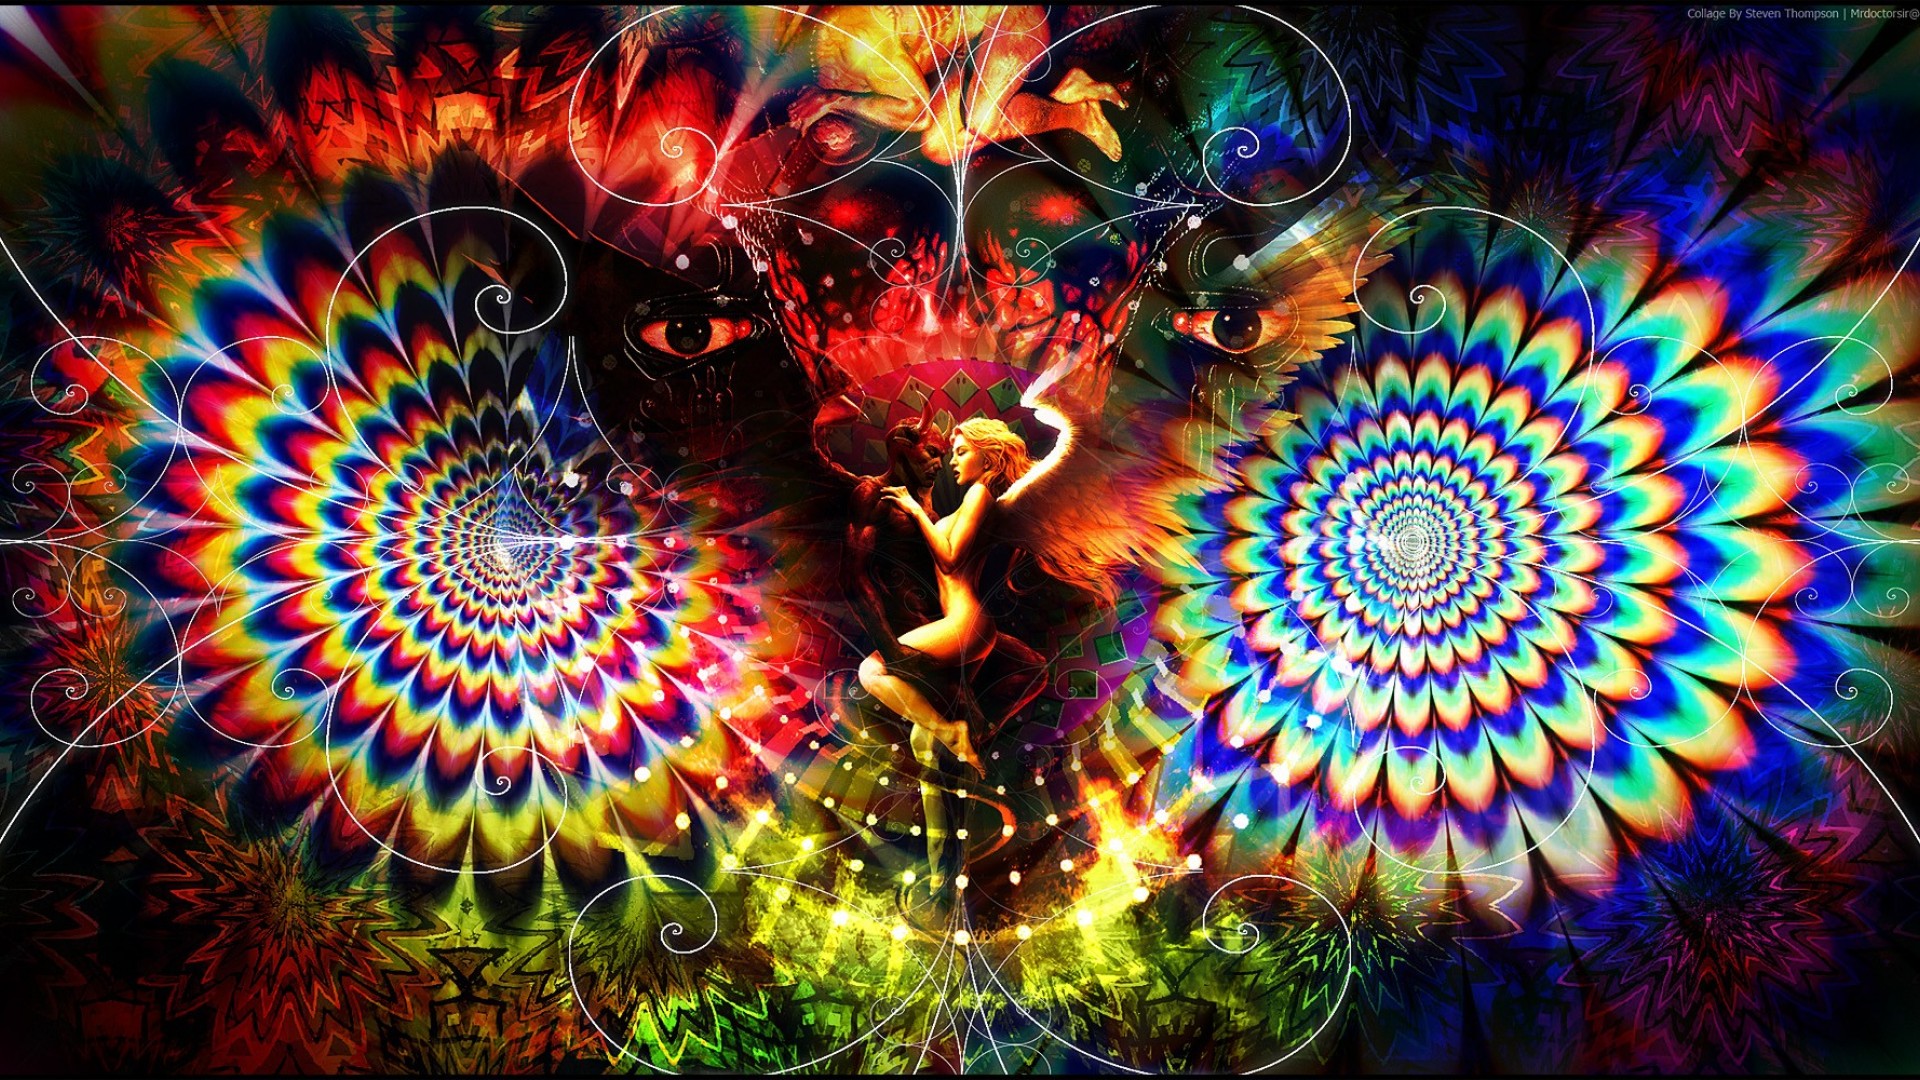 50+ Best Psychedelic and Trippy Wallpapers in HD - Techonloop